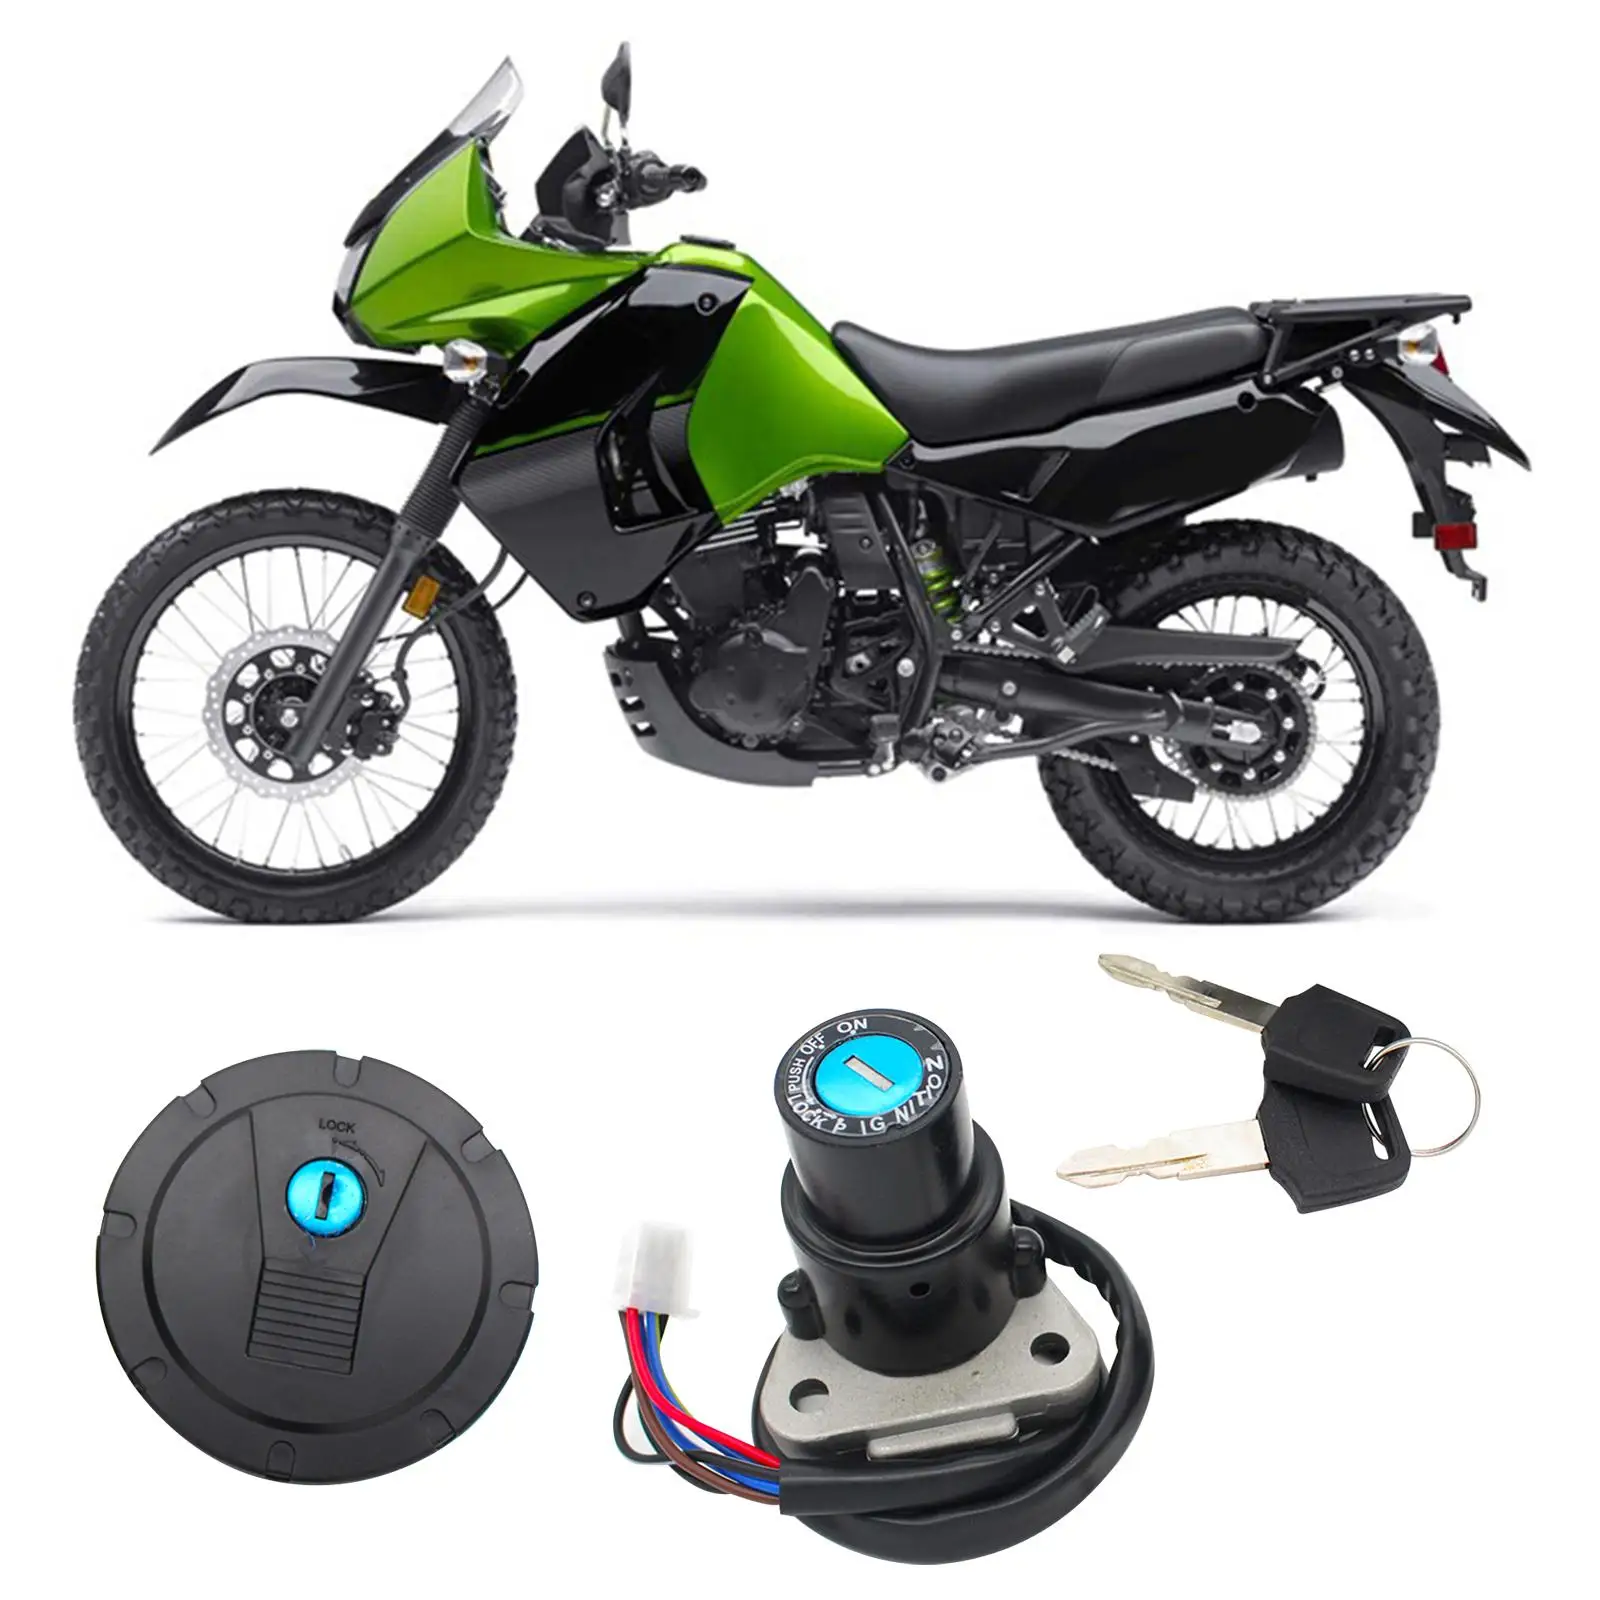 Motorcycle Ignition Switch Spare Parts High Performance with Key Barrel Lock Cylinder for Kawasaki Klr650 Klr 650 1987-2007